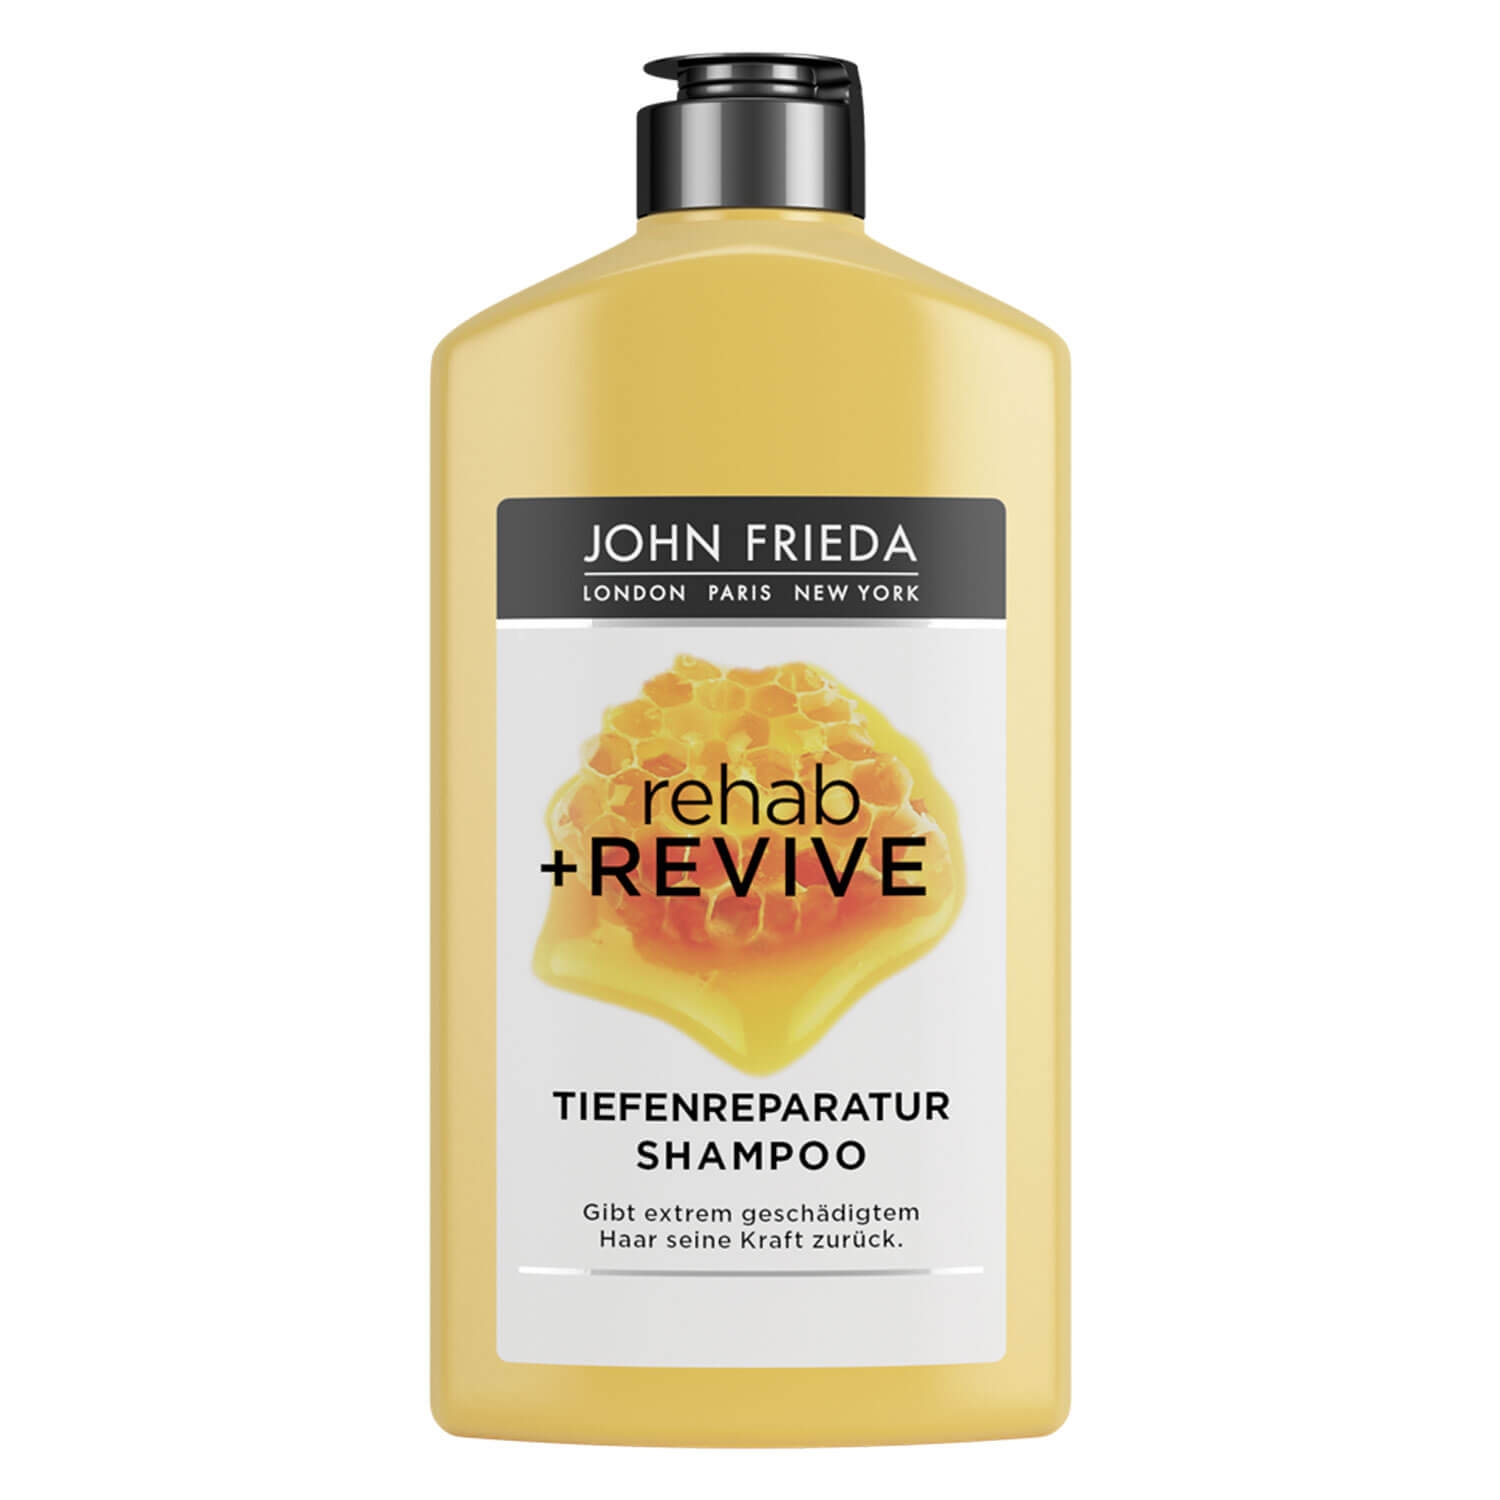 Product image from Rehab + Revive - Tiefenreparatur Shampoo